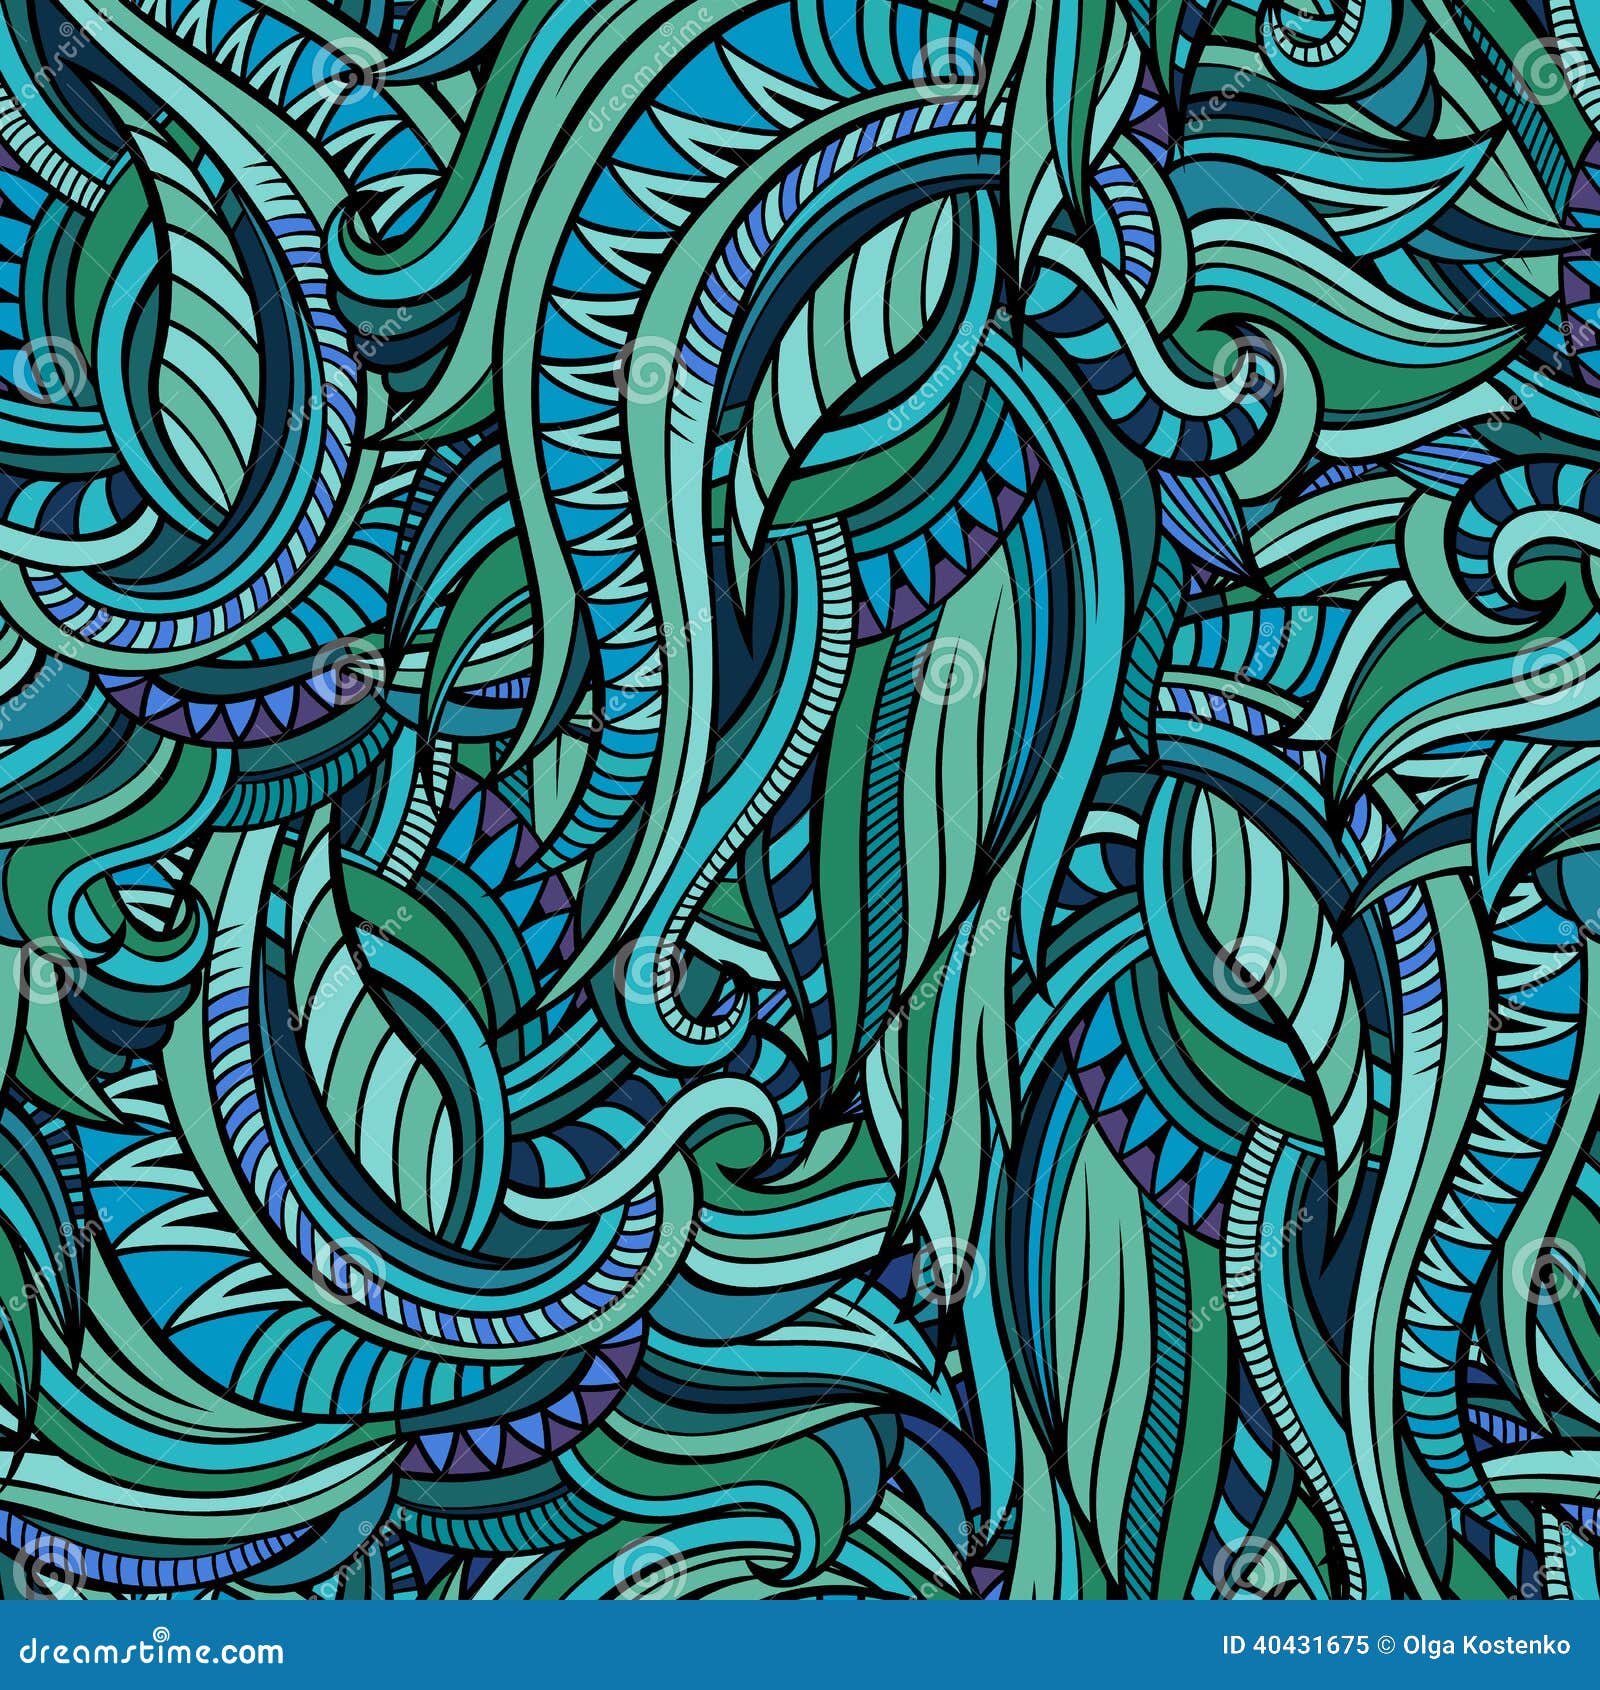 Abstract Nature Pattern Stock – 1,139,993 Abstract Nature Pattern Stock Illustrations, Vectors & Clipart - Dreamstime